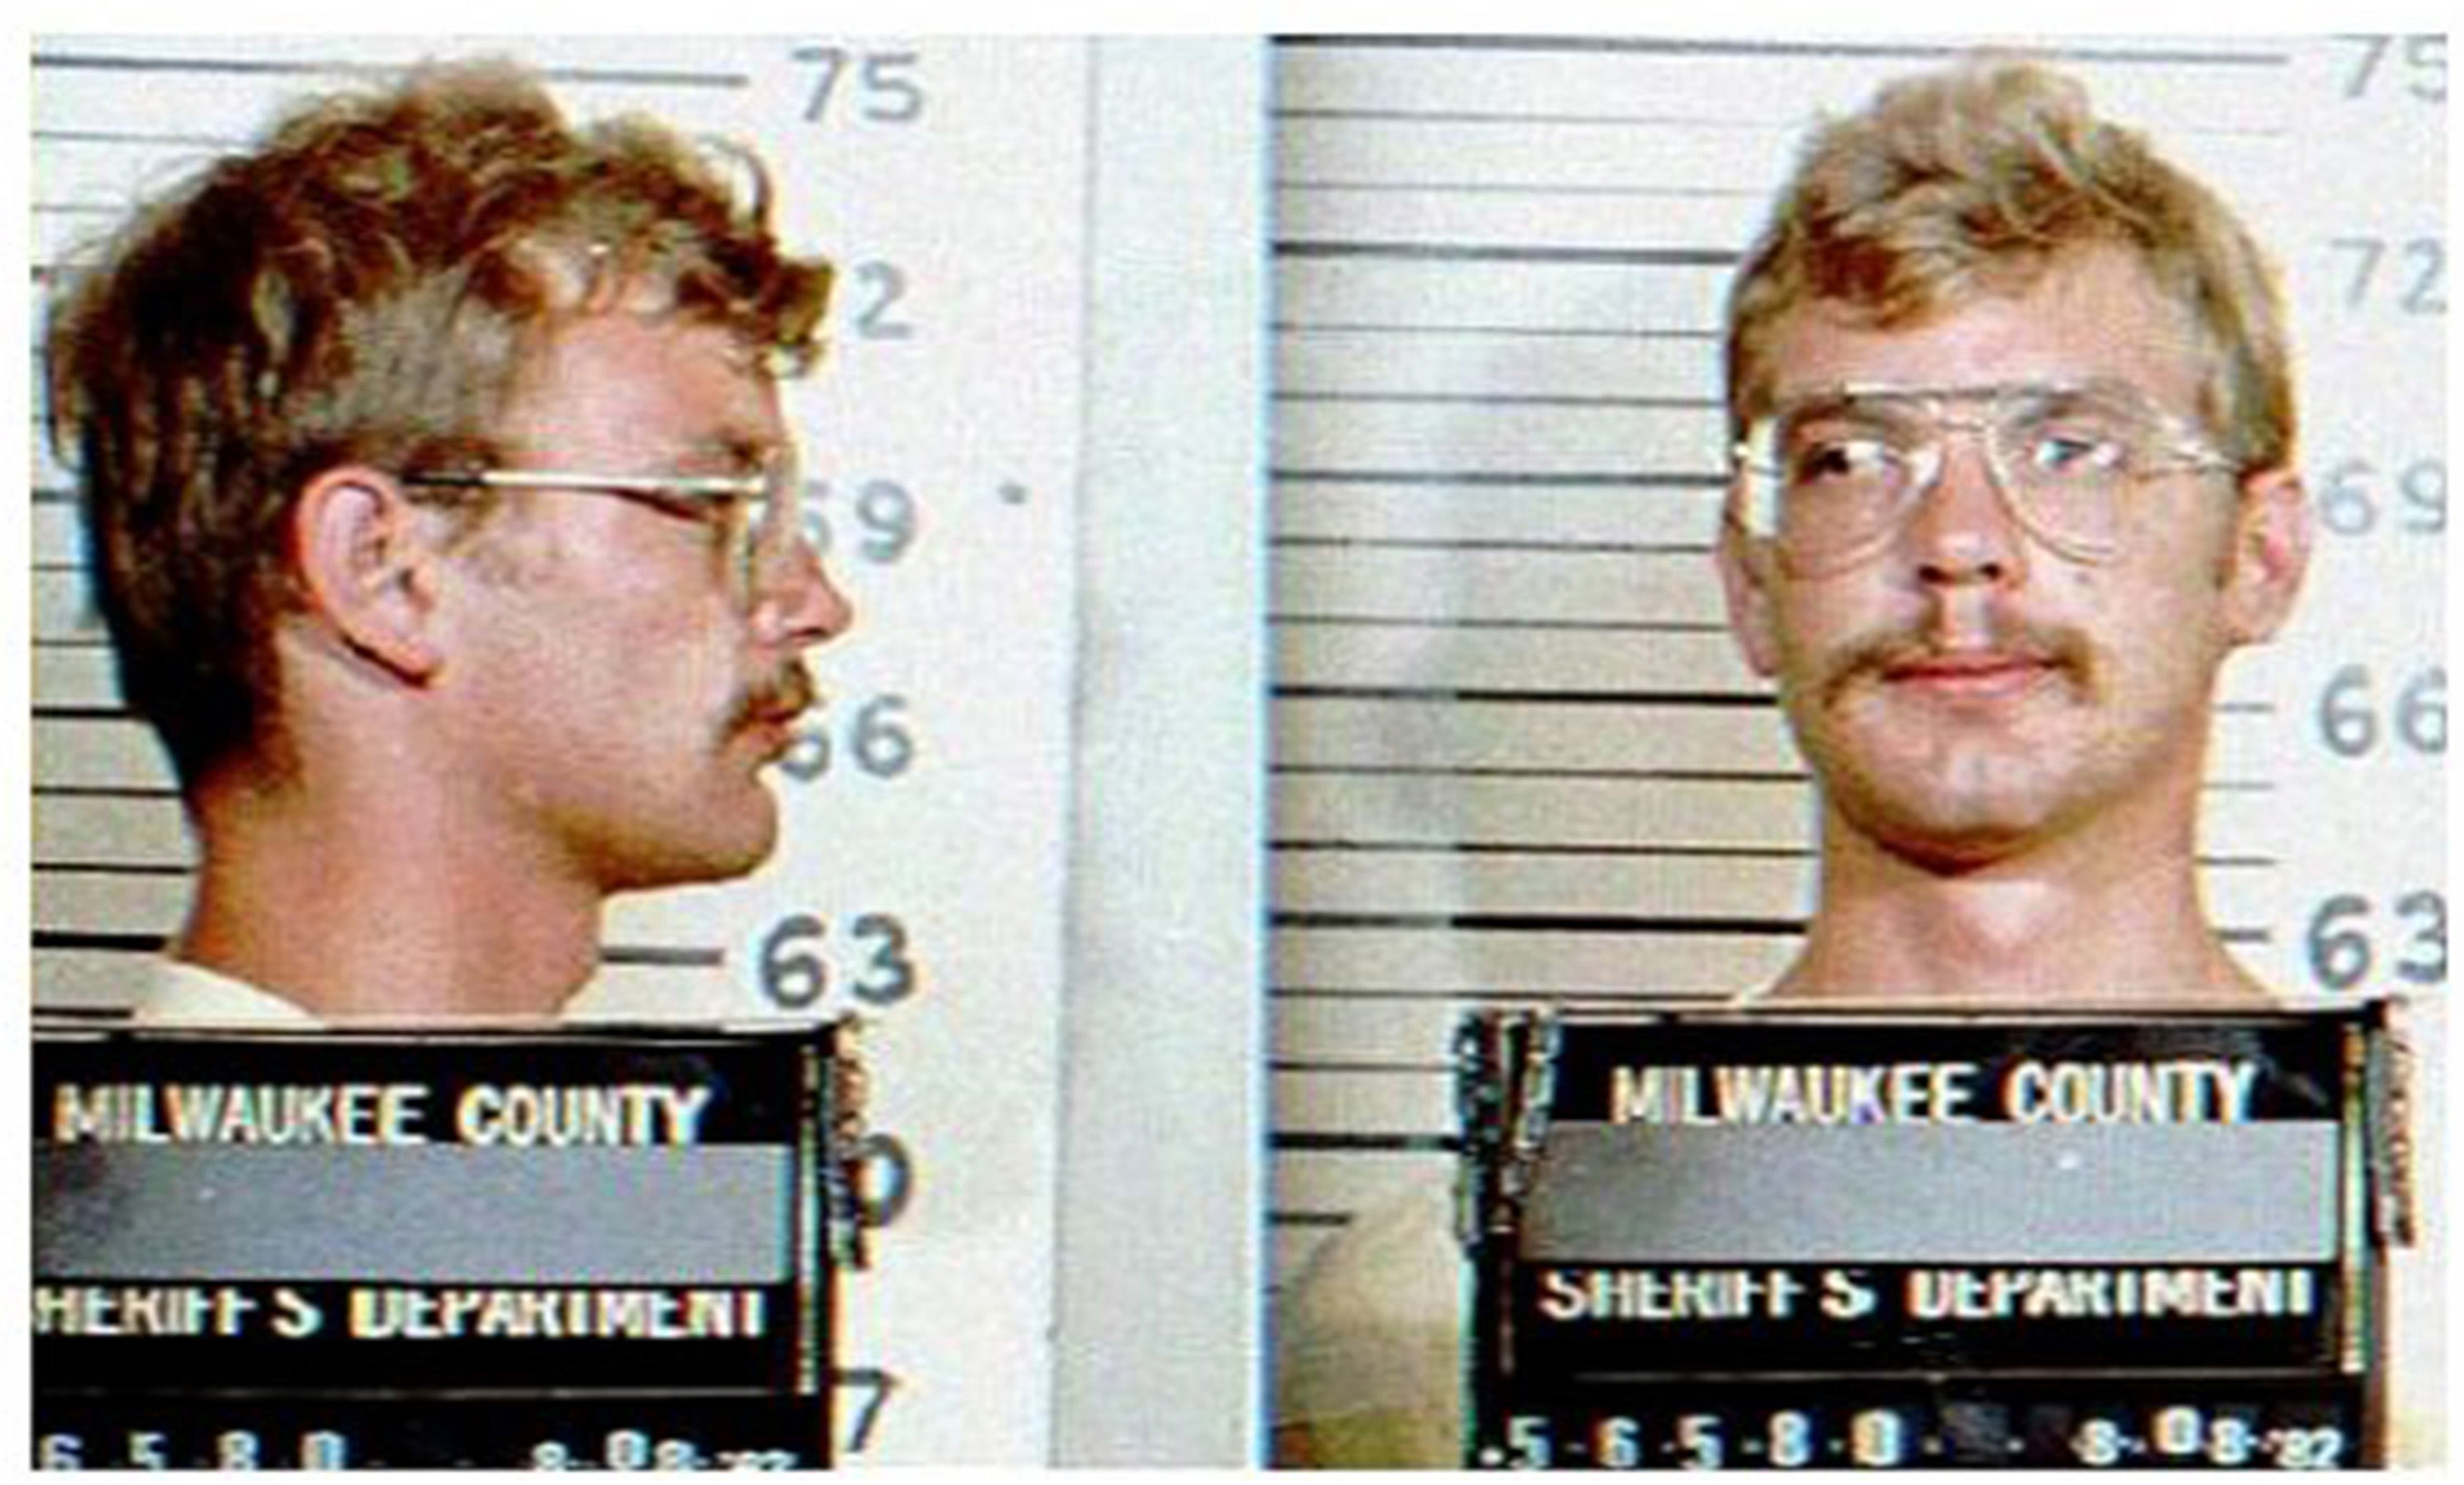 Never-before-heard audio tapes of Jeffrey Dahmer, father bring new insight into infamous killer's crimes